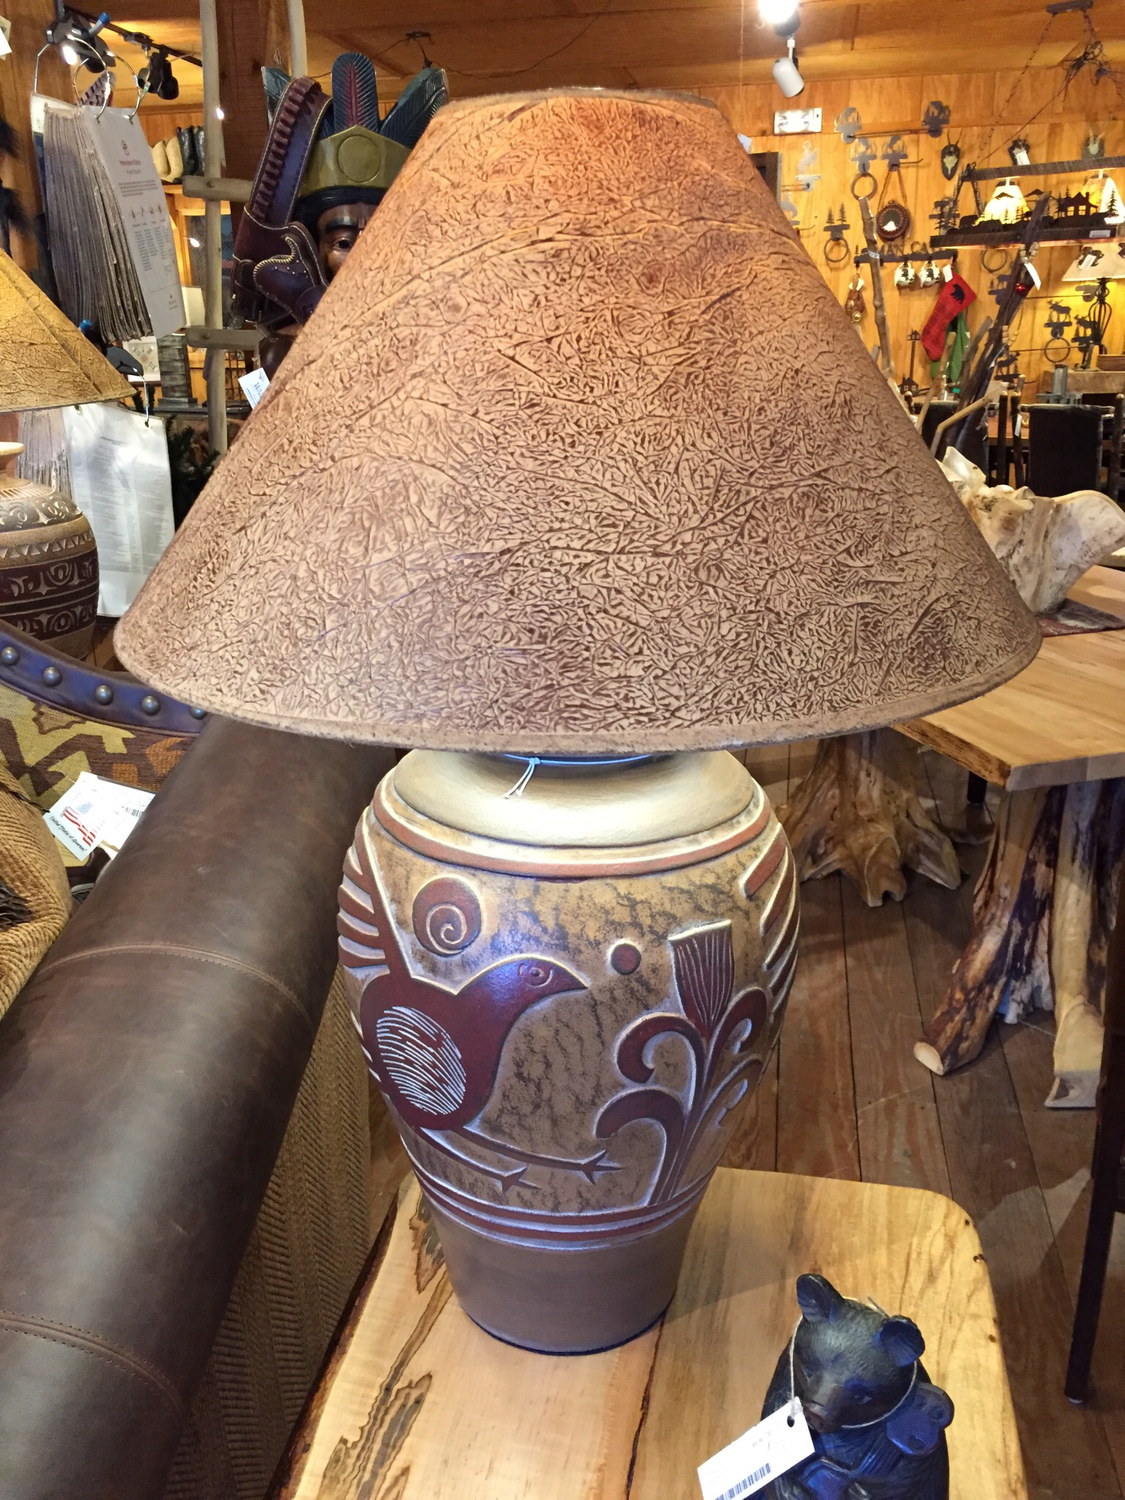 29"H Table Lamp